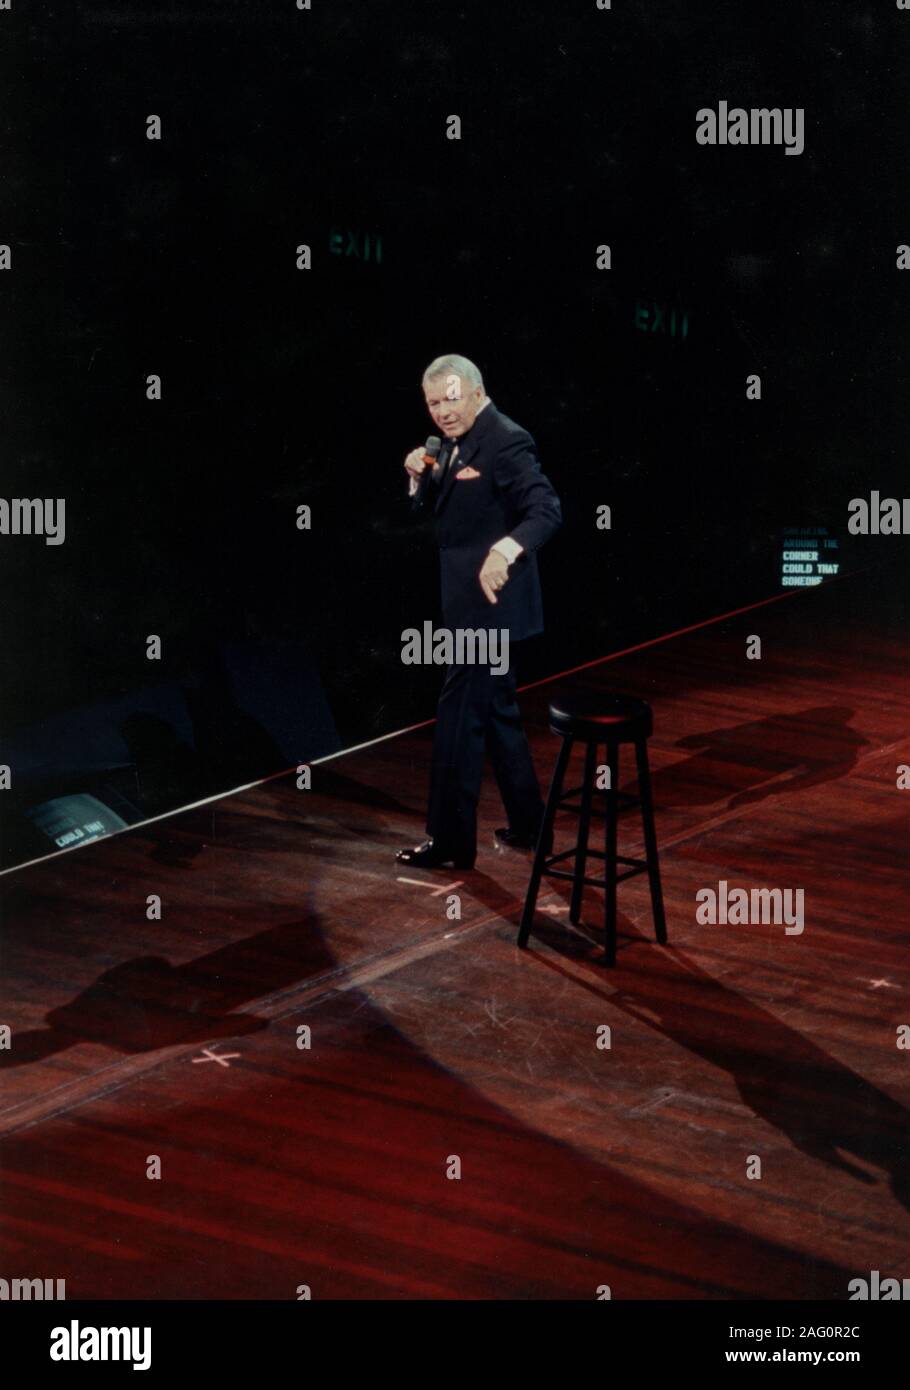 Frank Sinatra, Royal Albert Hall, London, 1989. In April 1989, three of the greatest icons of American popular music, Frank Sinatra, Liza Minnelli and Sammy Davis Jr, came together in Frank, Liza and Sammy: The Ultimate Event. Stock Photo